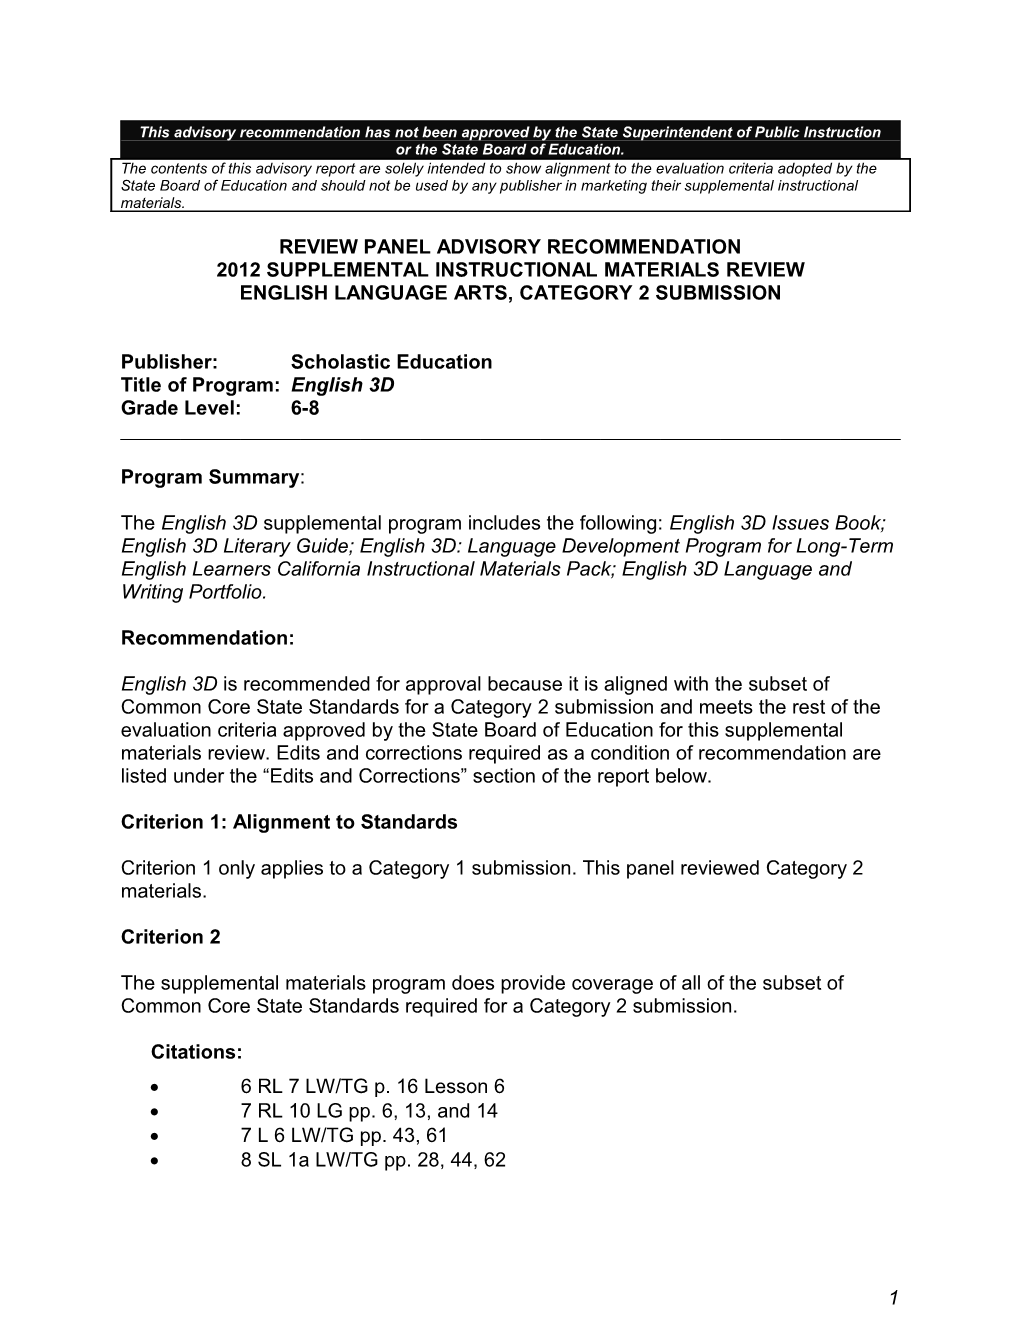 Panel Report of the English 3D - SIMR (CA Dept of Education)